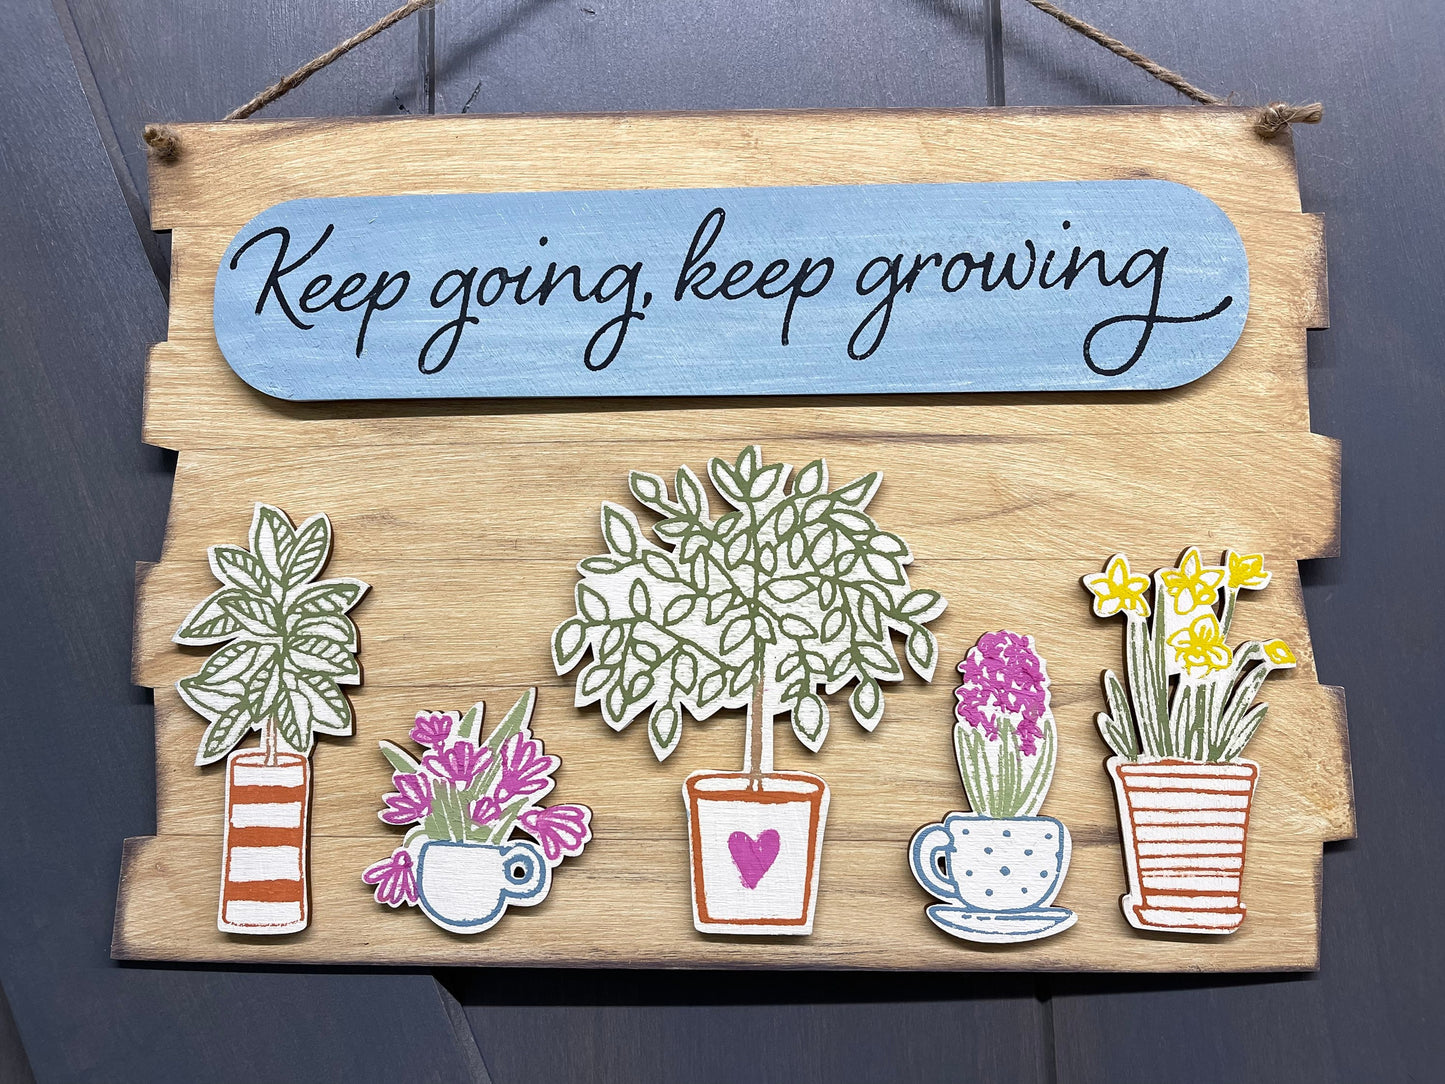 Keep going, keep growing cut out pieces only. Includes oval and five plants